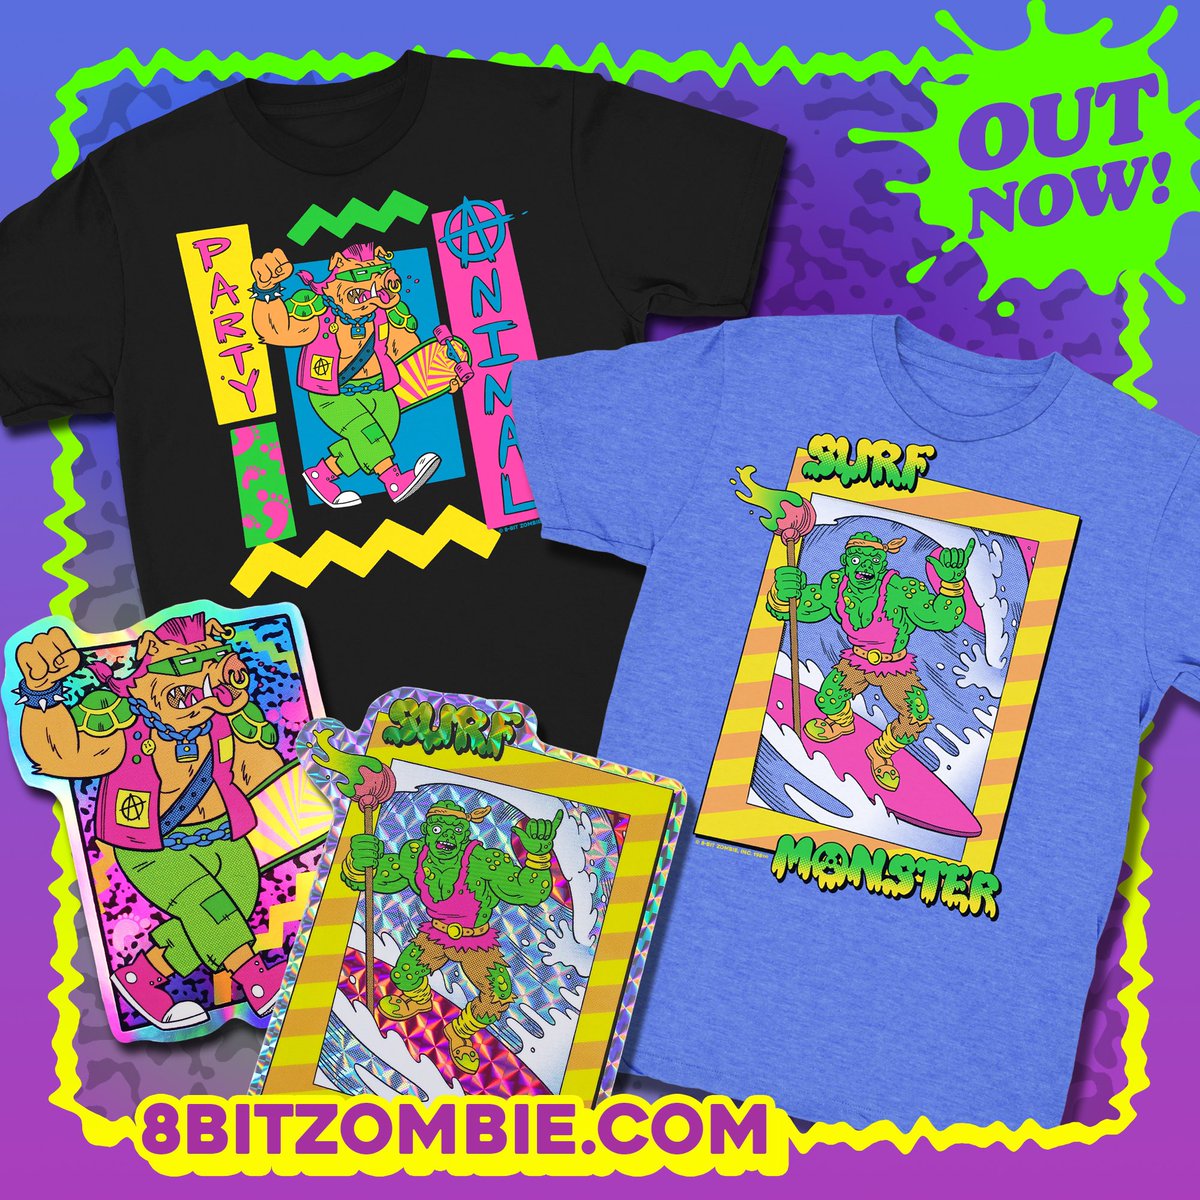 This bodacious day-glow radness is available now! Beat the summer heat and stay cool with these fresh new 8BZ tees. 😎🤙 8BITZOMBIE.COM